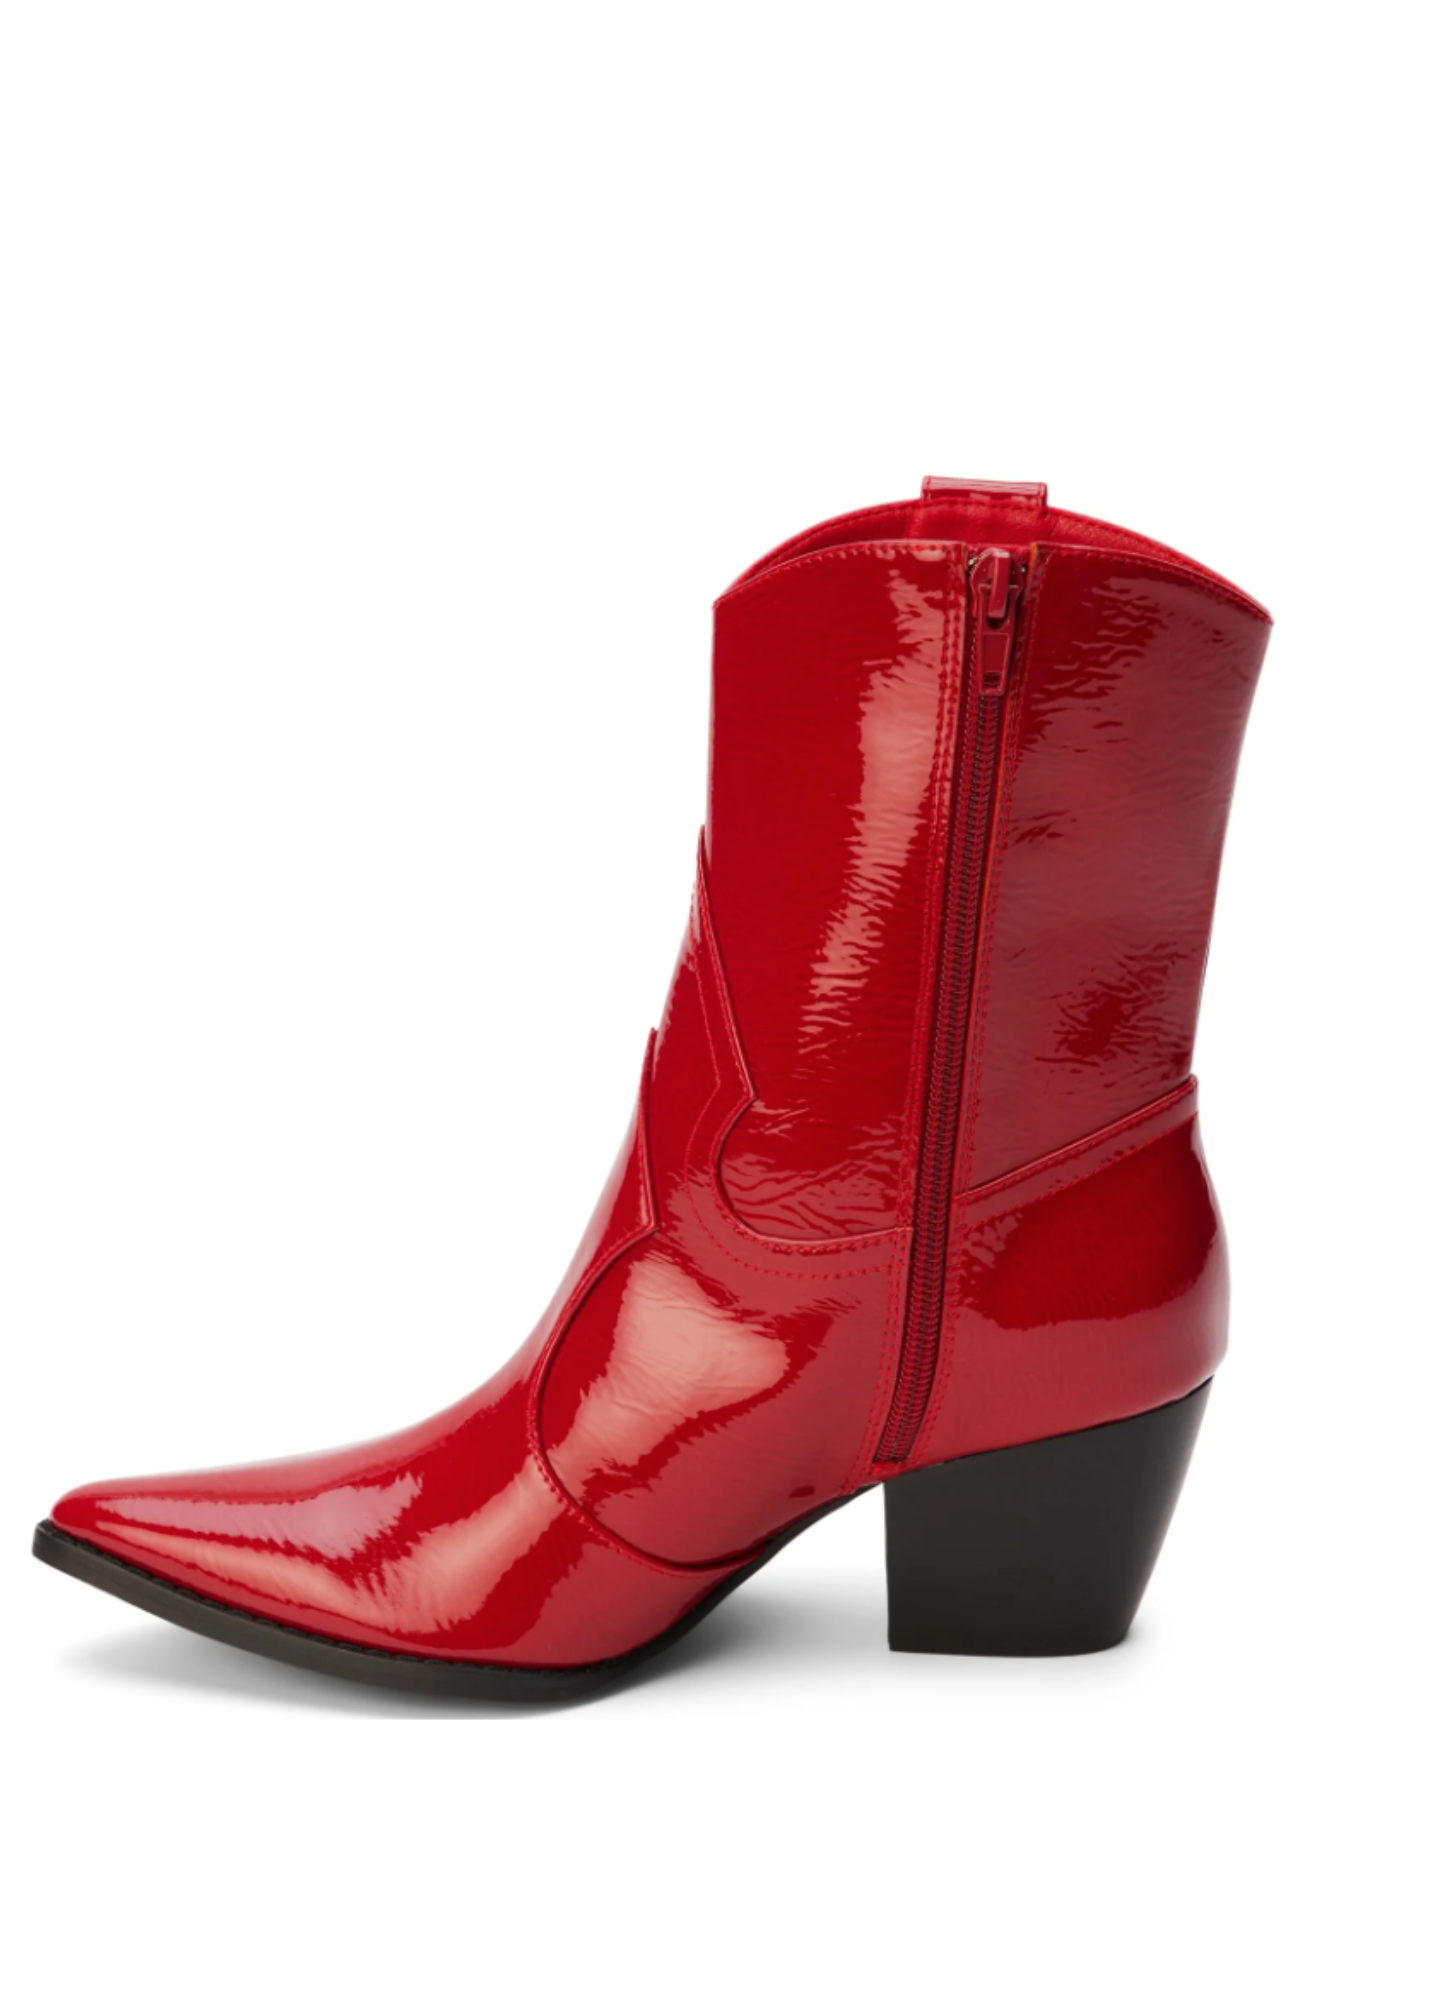 Bambi Ankle Boot in Red Patent